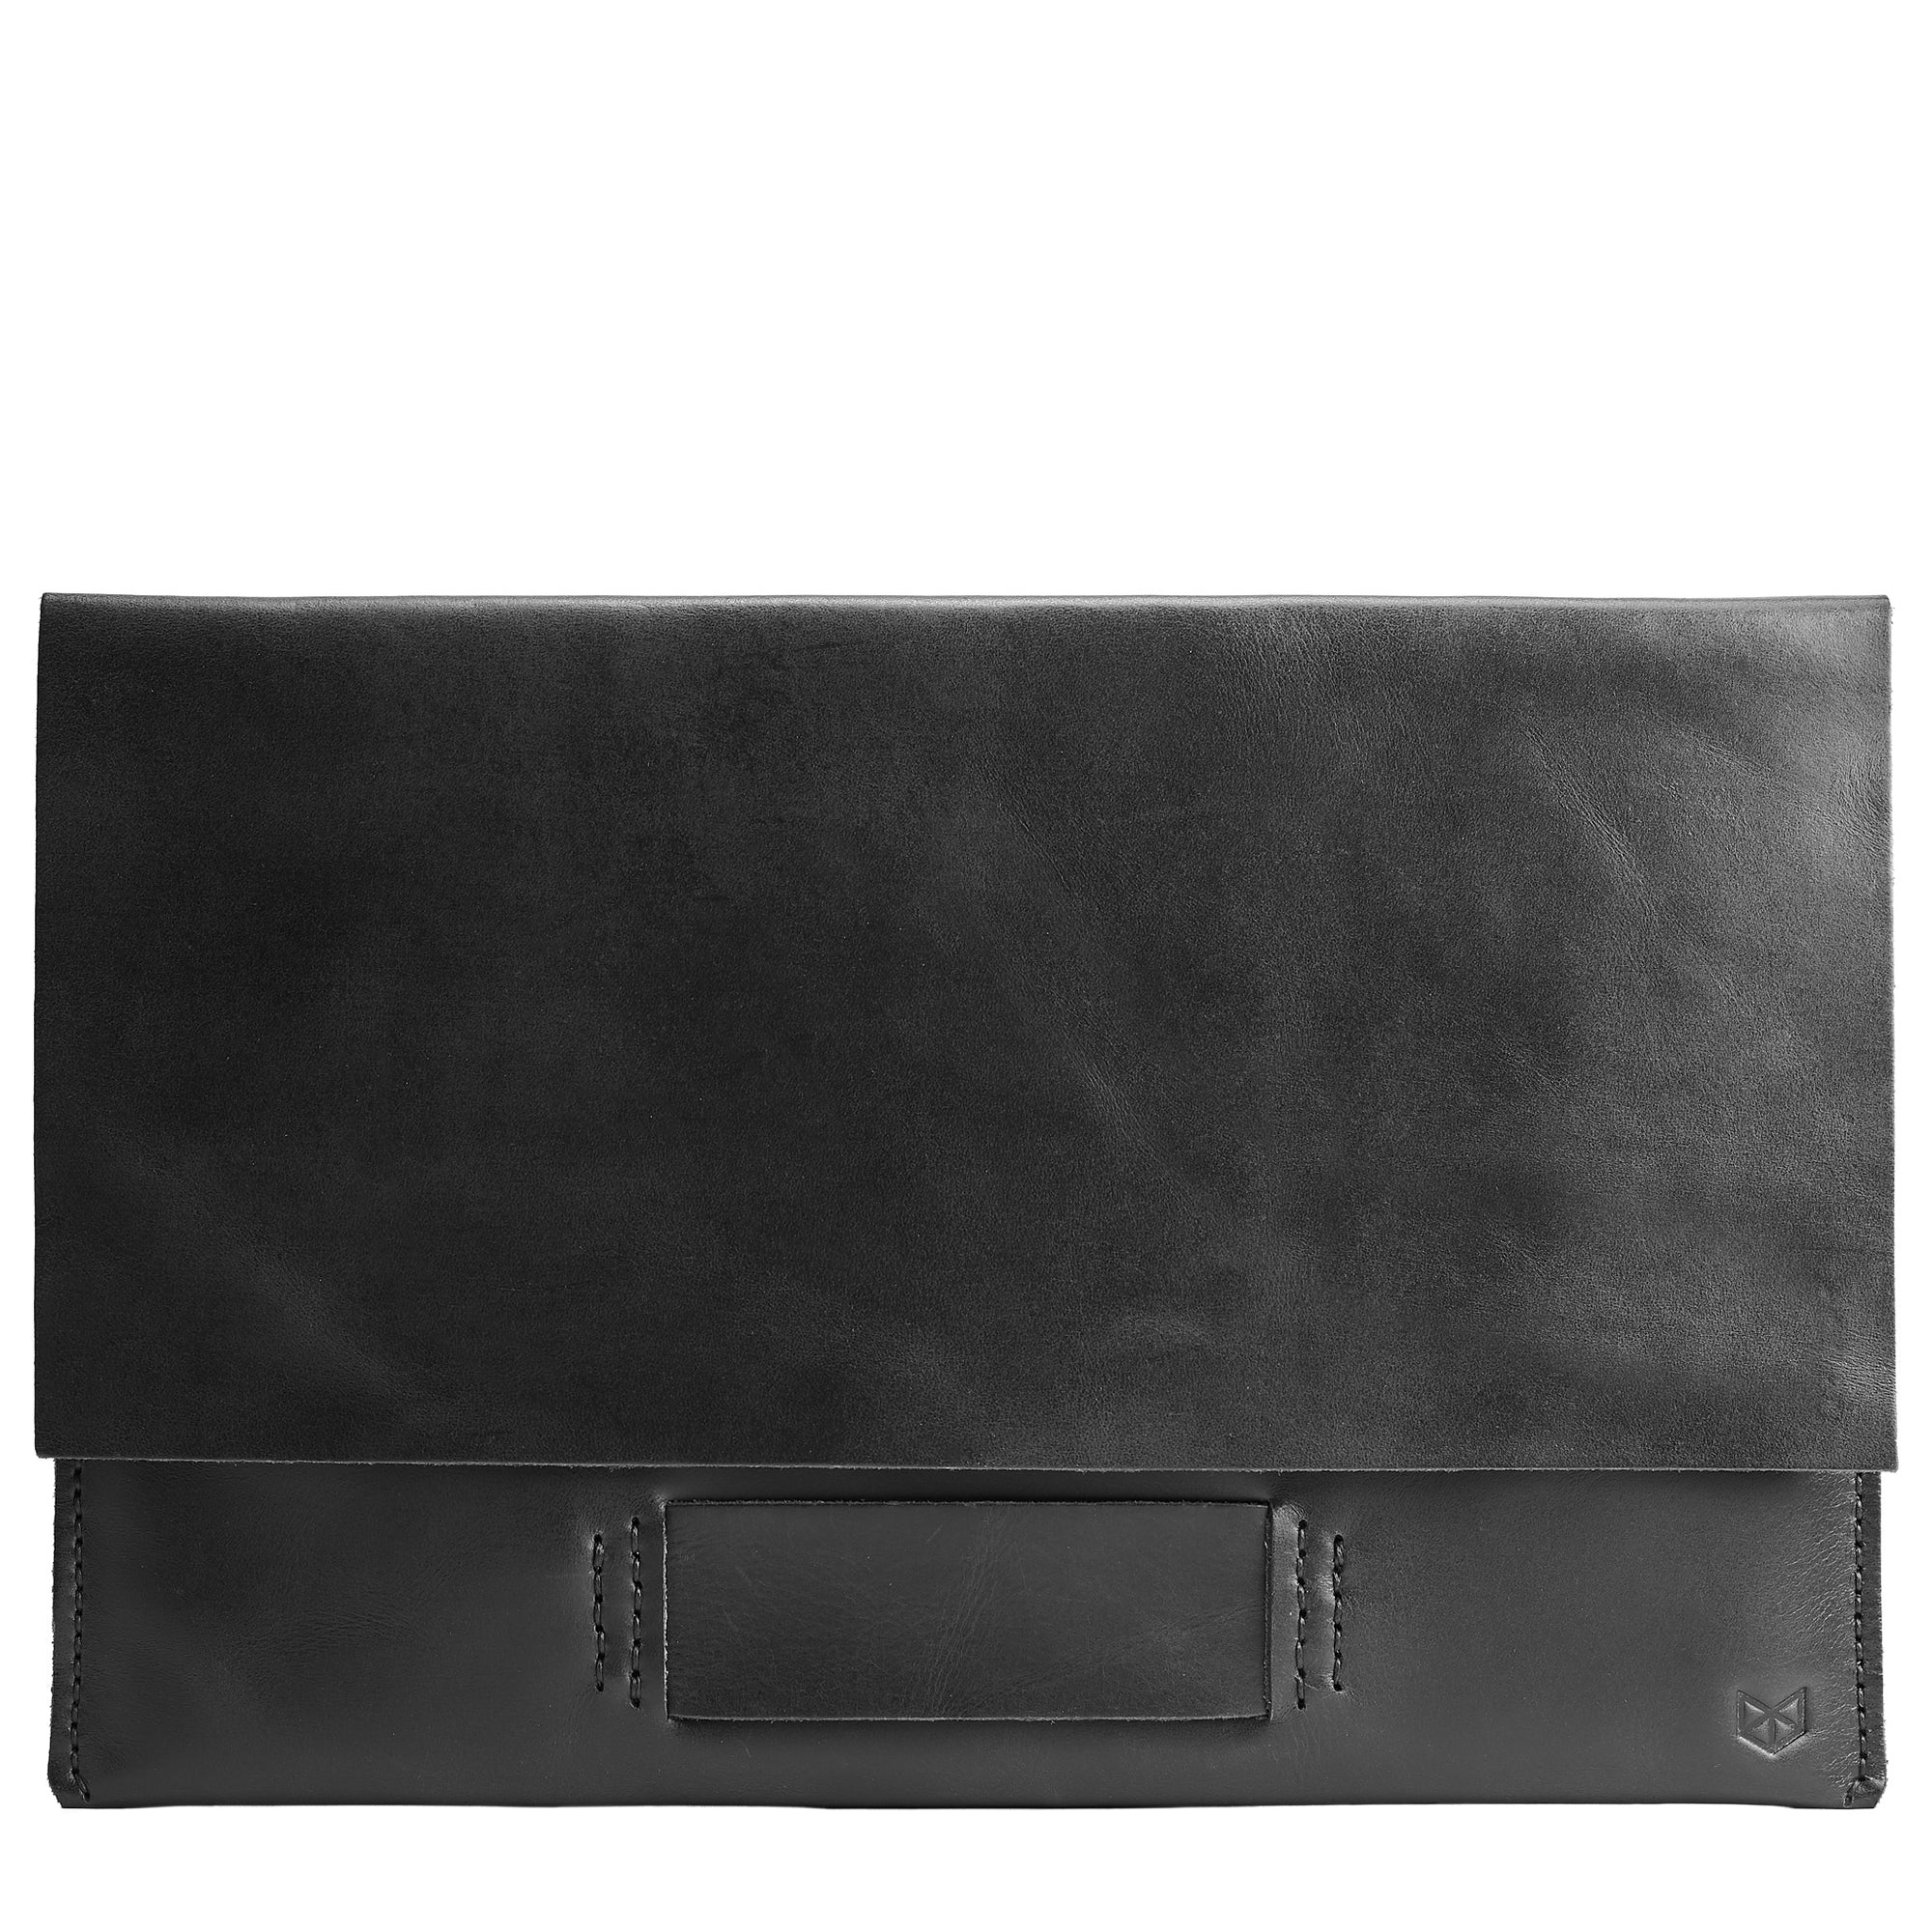 Cover. Black Leather Walker iPad Cover Case Sleeve by Capra Leather